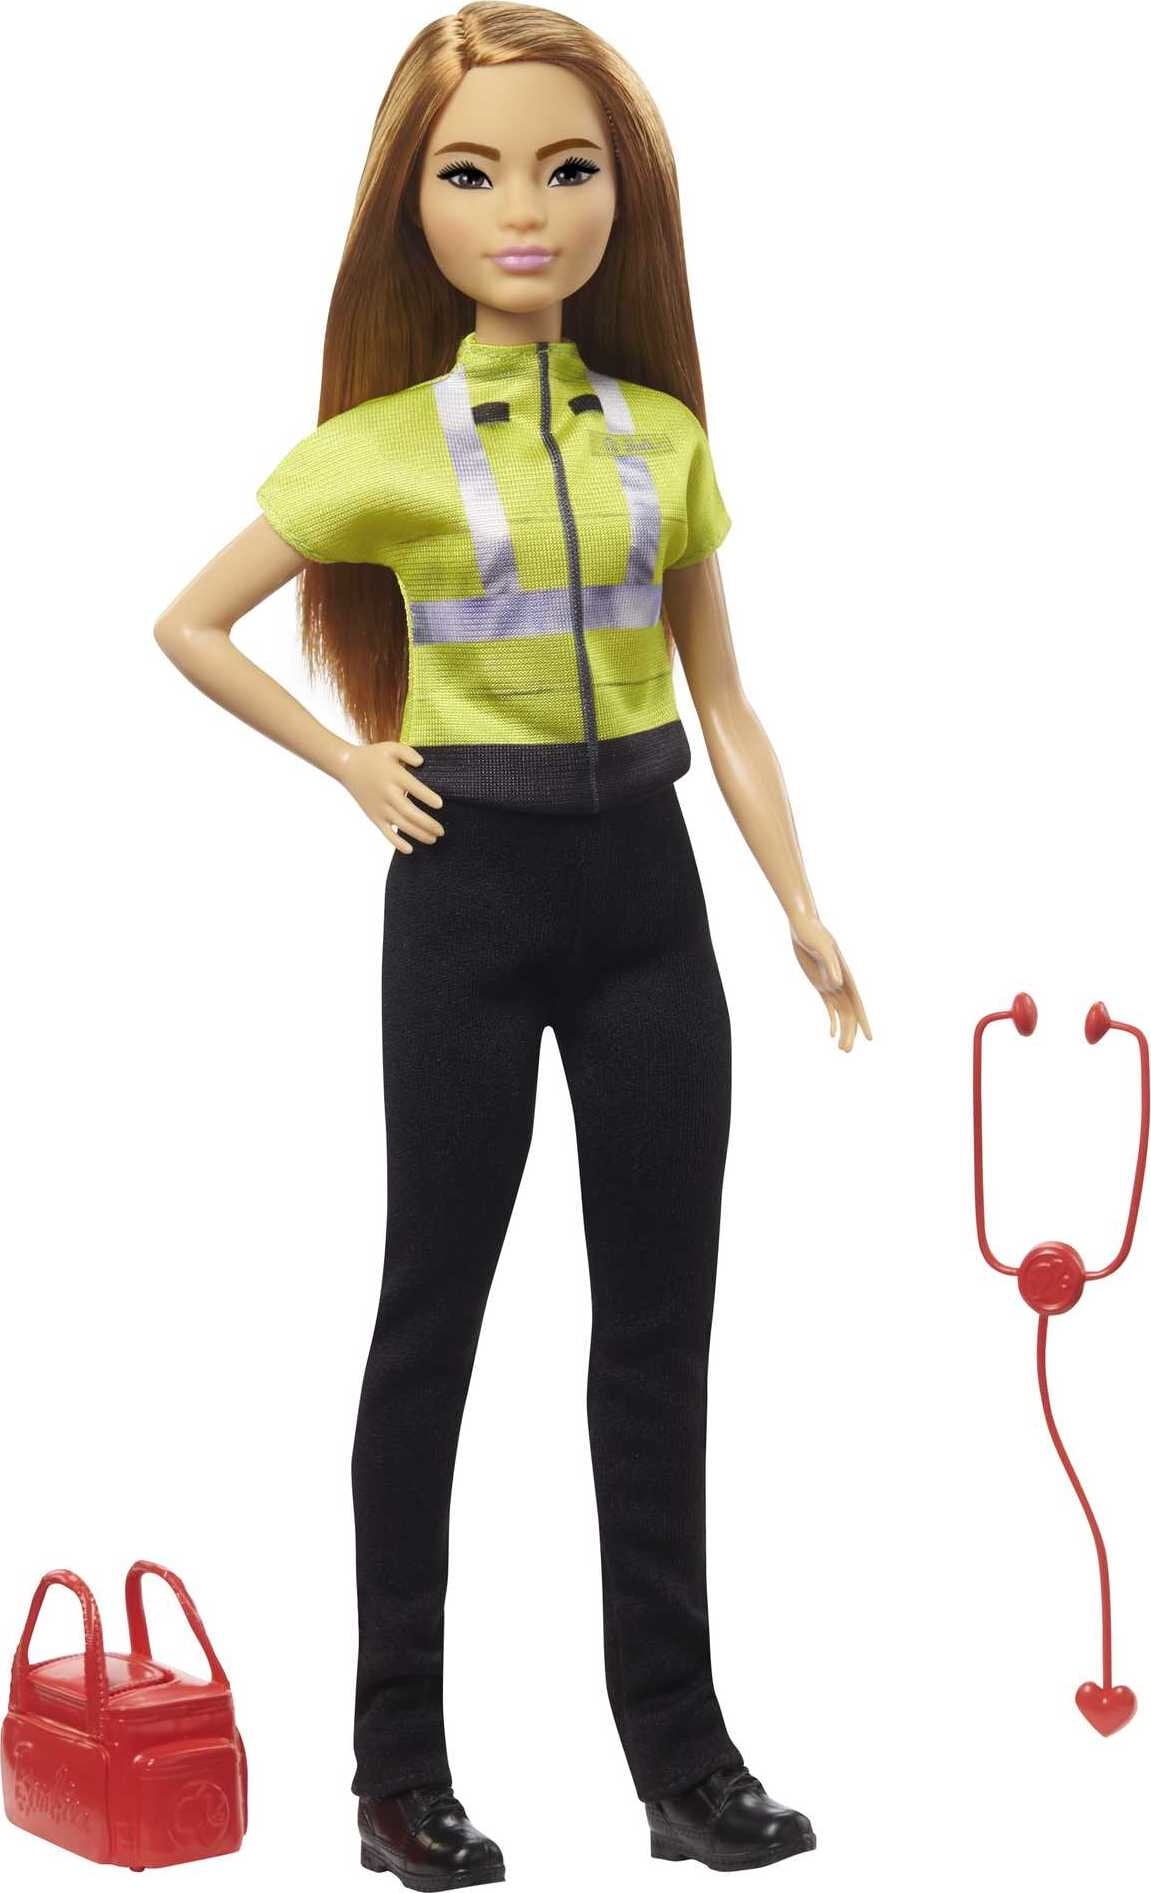 Pilot Doll New Toy Toy Mattel Paper Doll Barbie 